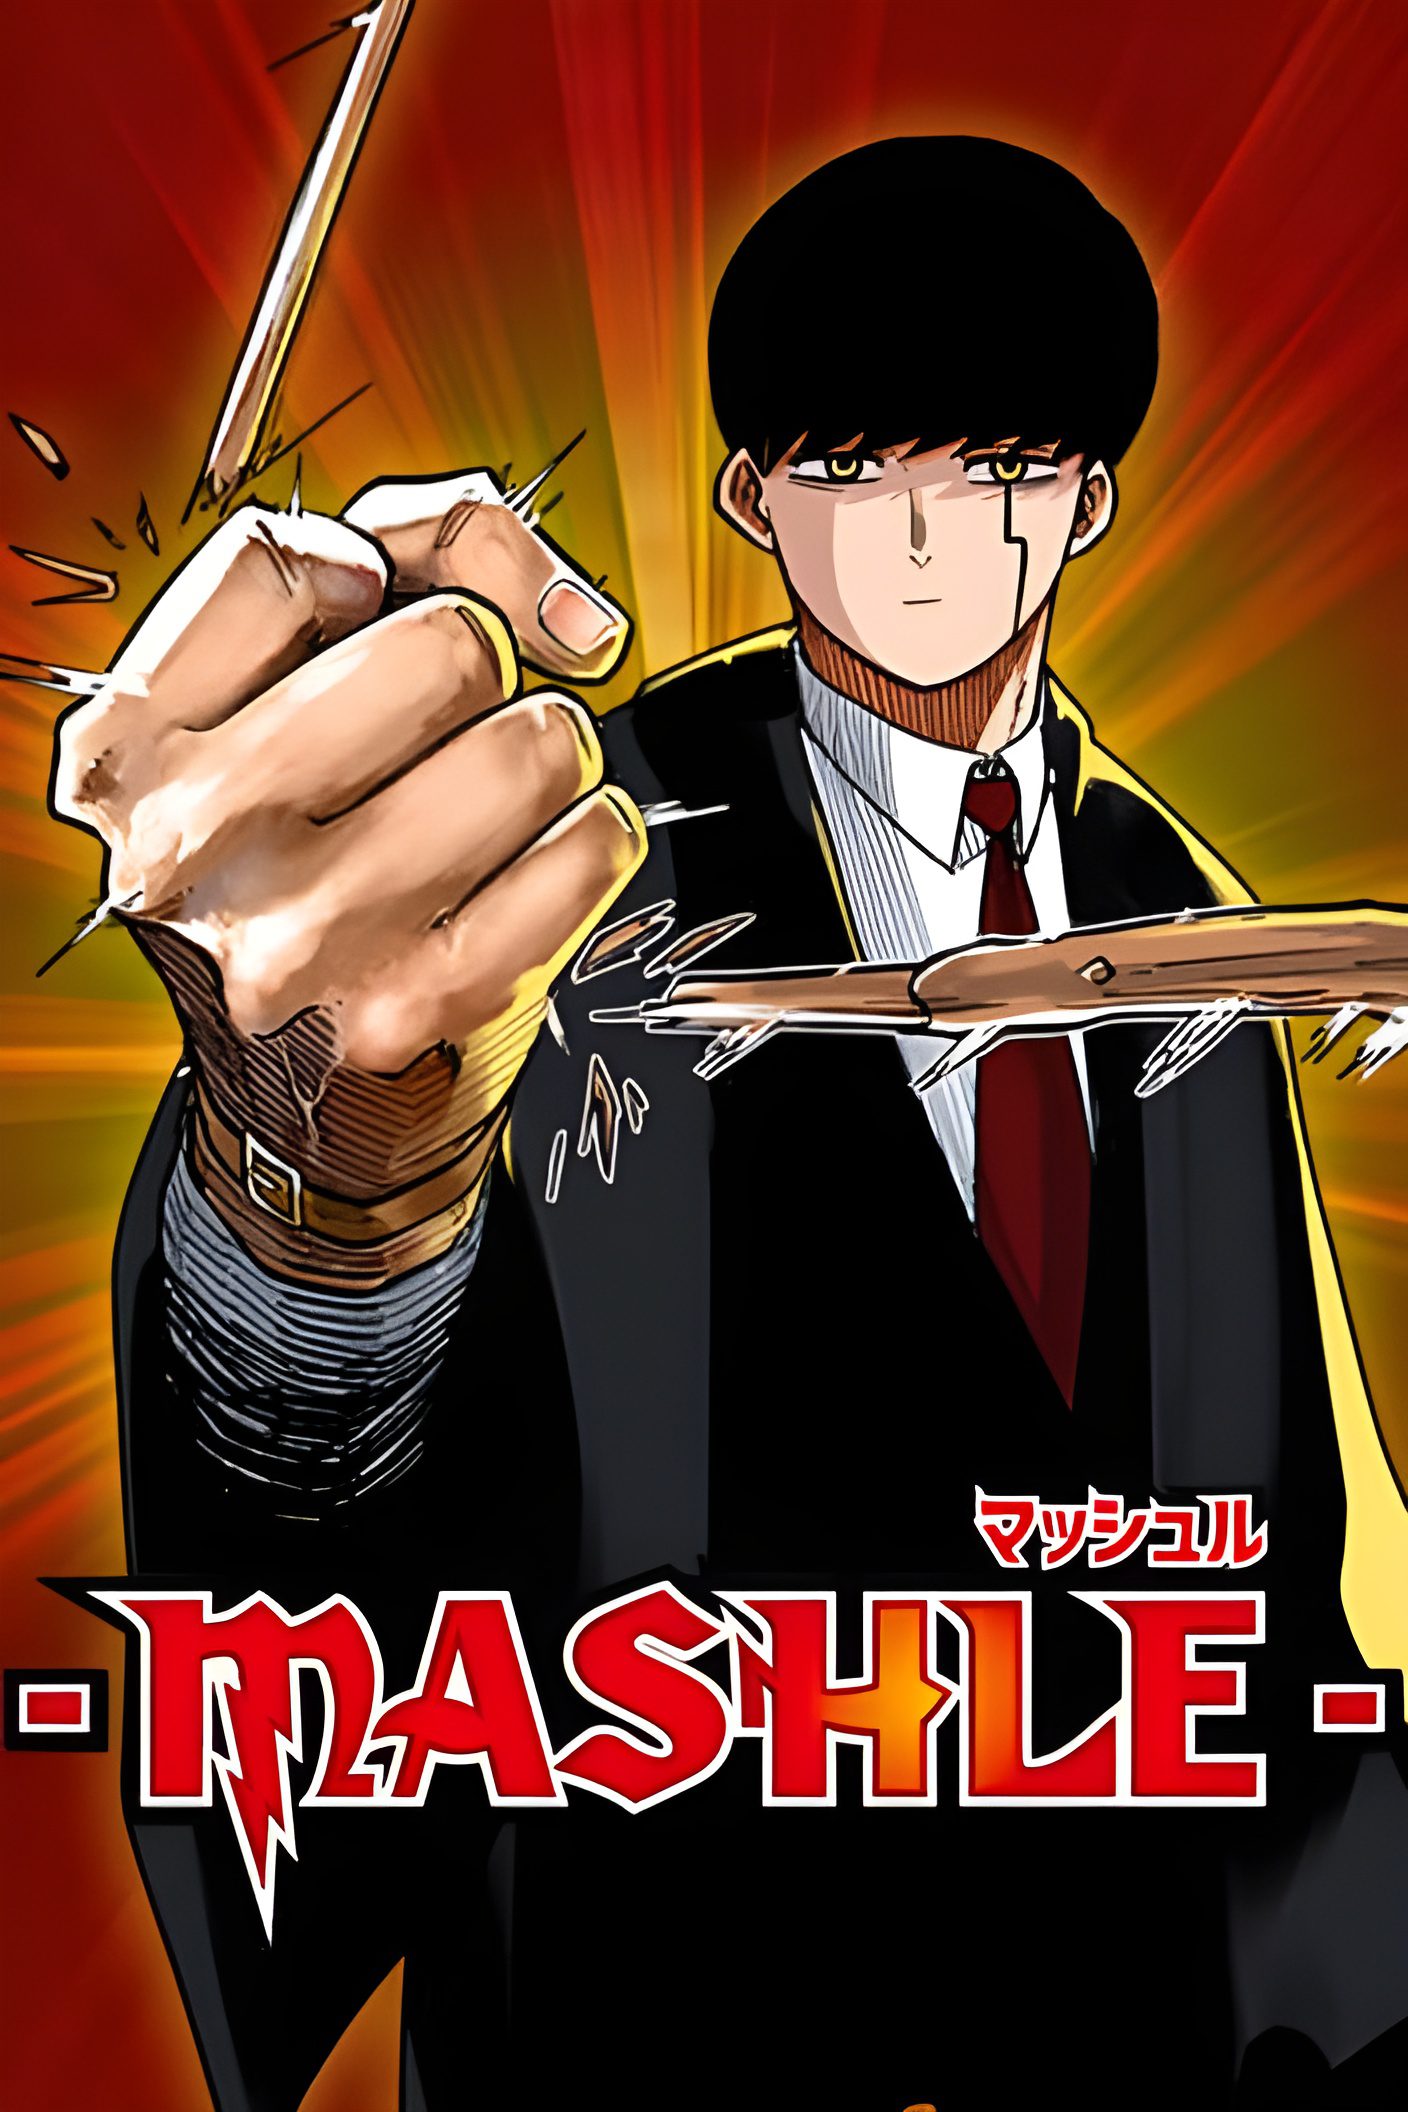 Mashle: Magic and Muscles Is a Parody With Classic Shonen Values